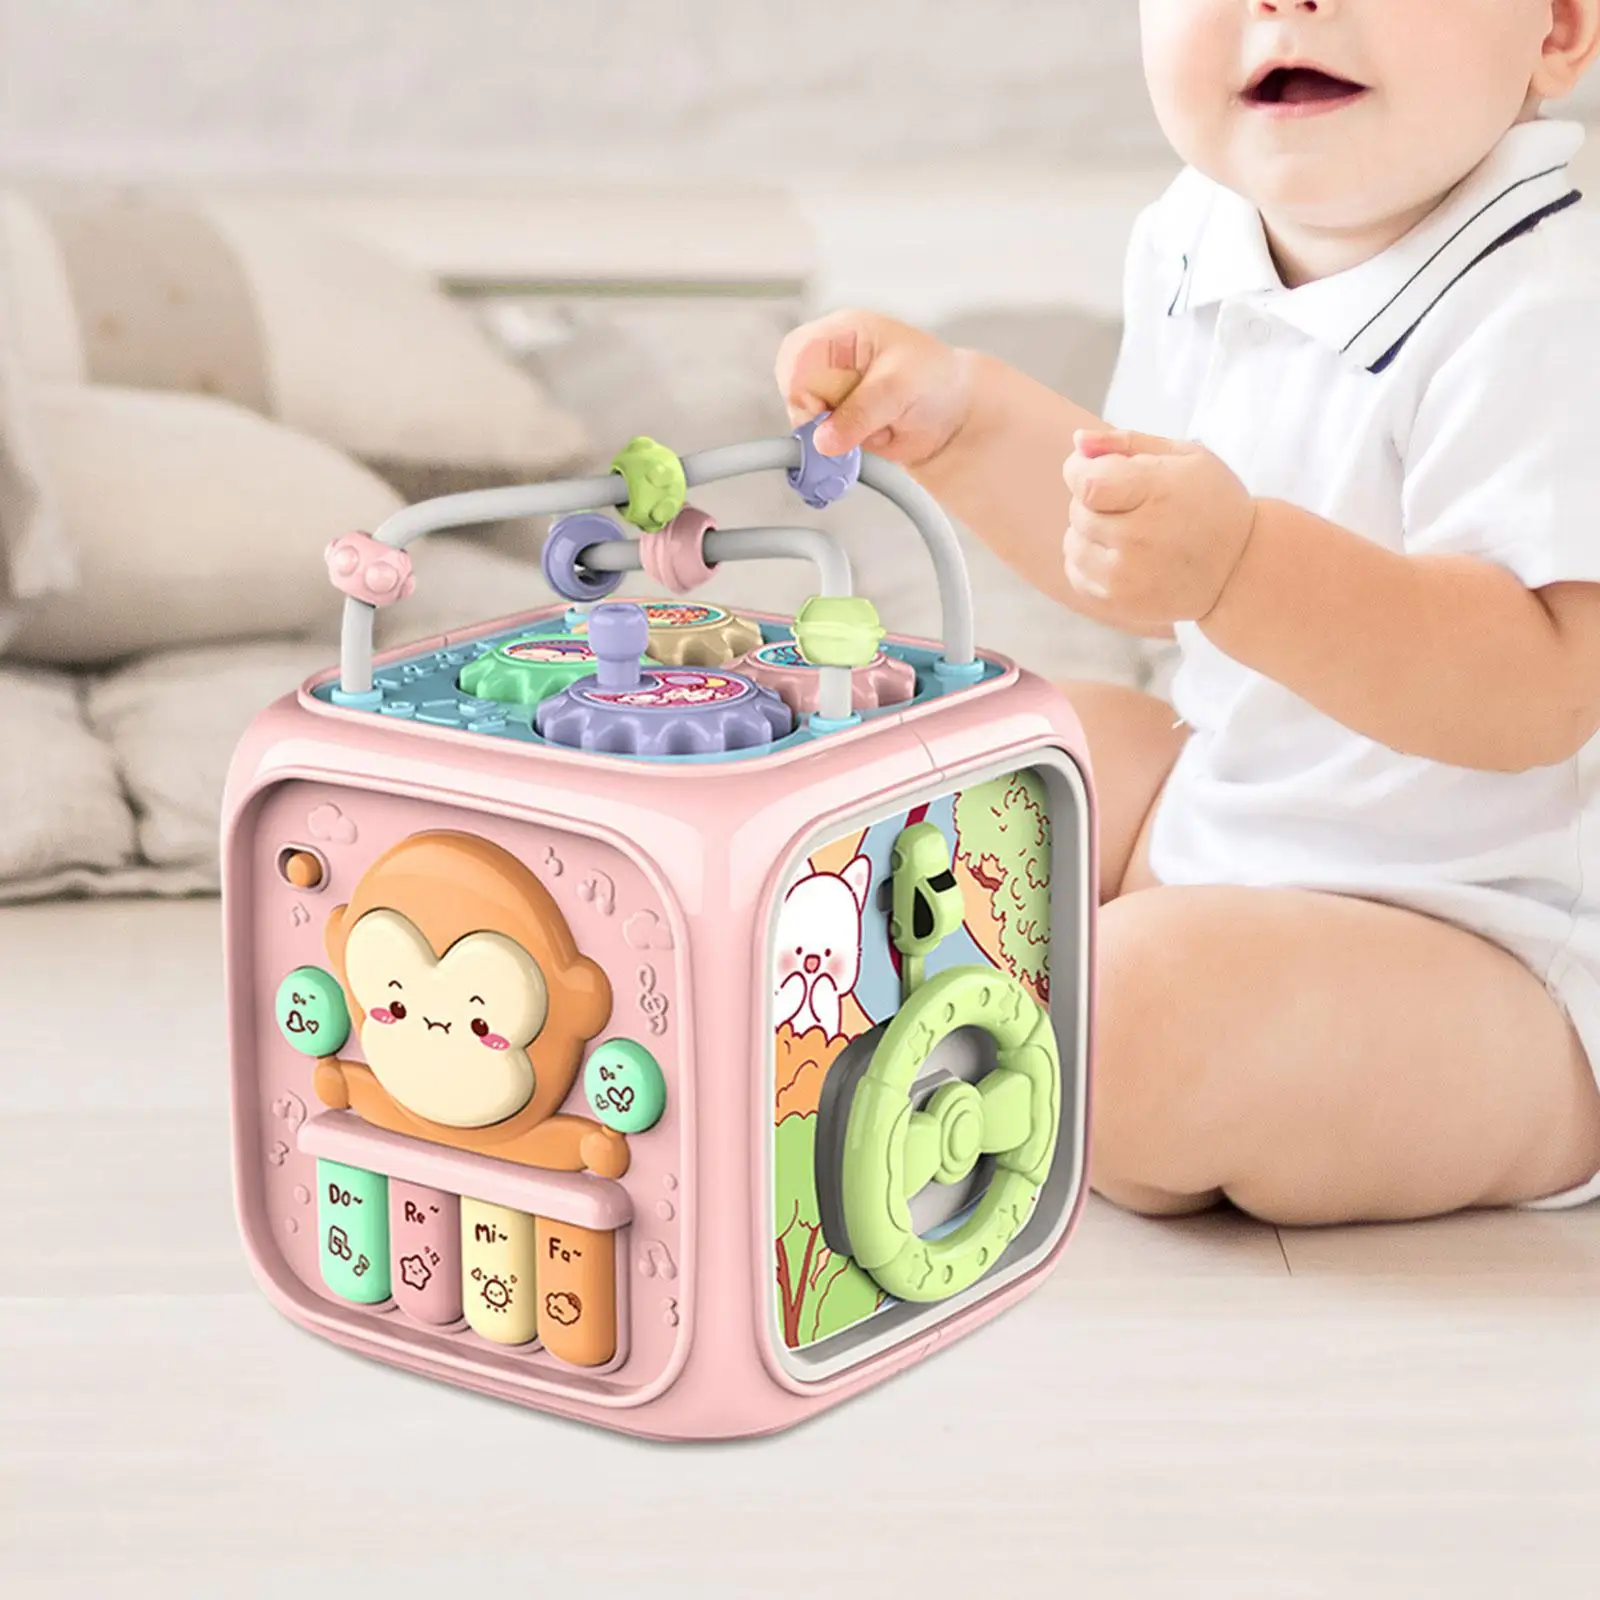 Busy Cube Color Shape Portable Sensory Busy Board Fine Motor Skills for Babies Birthday Gift Children 18-36 Month Boys and Girls